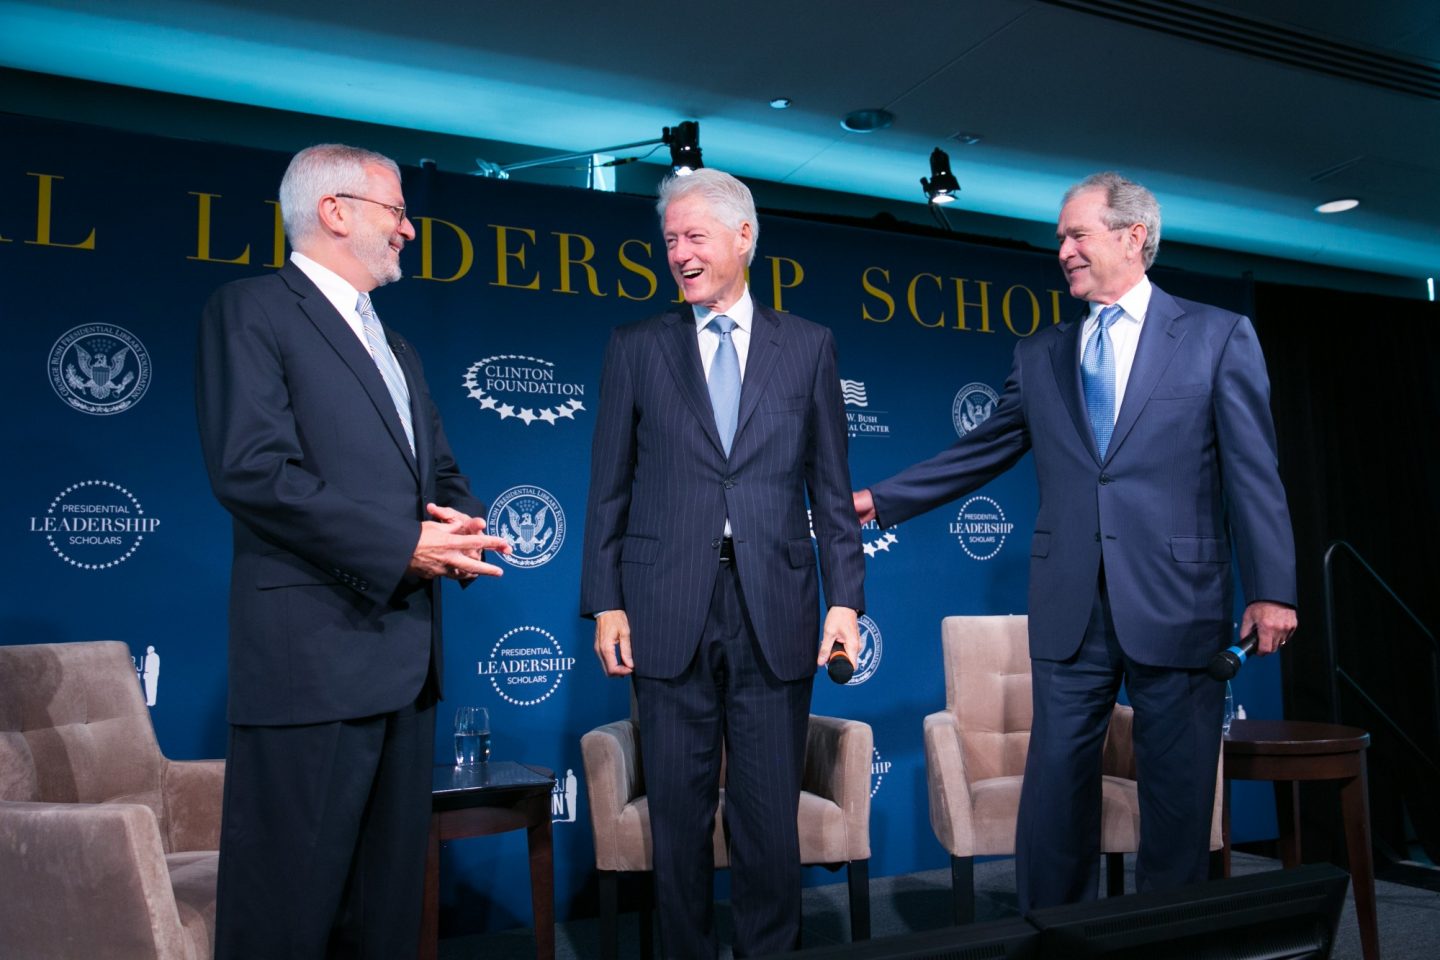 President Clinton and President George W. Bush stand onstage together